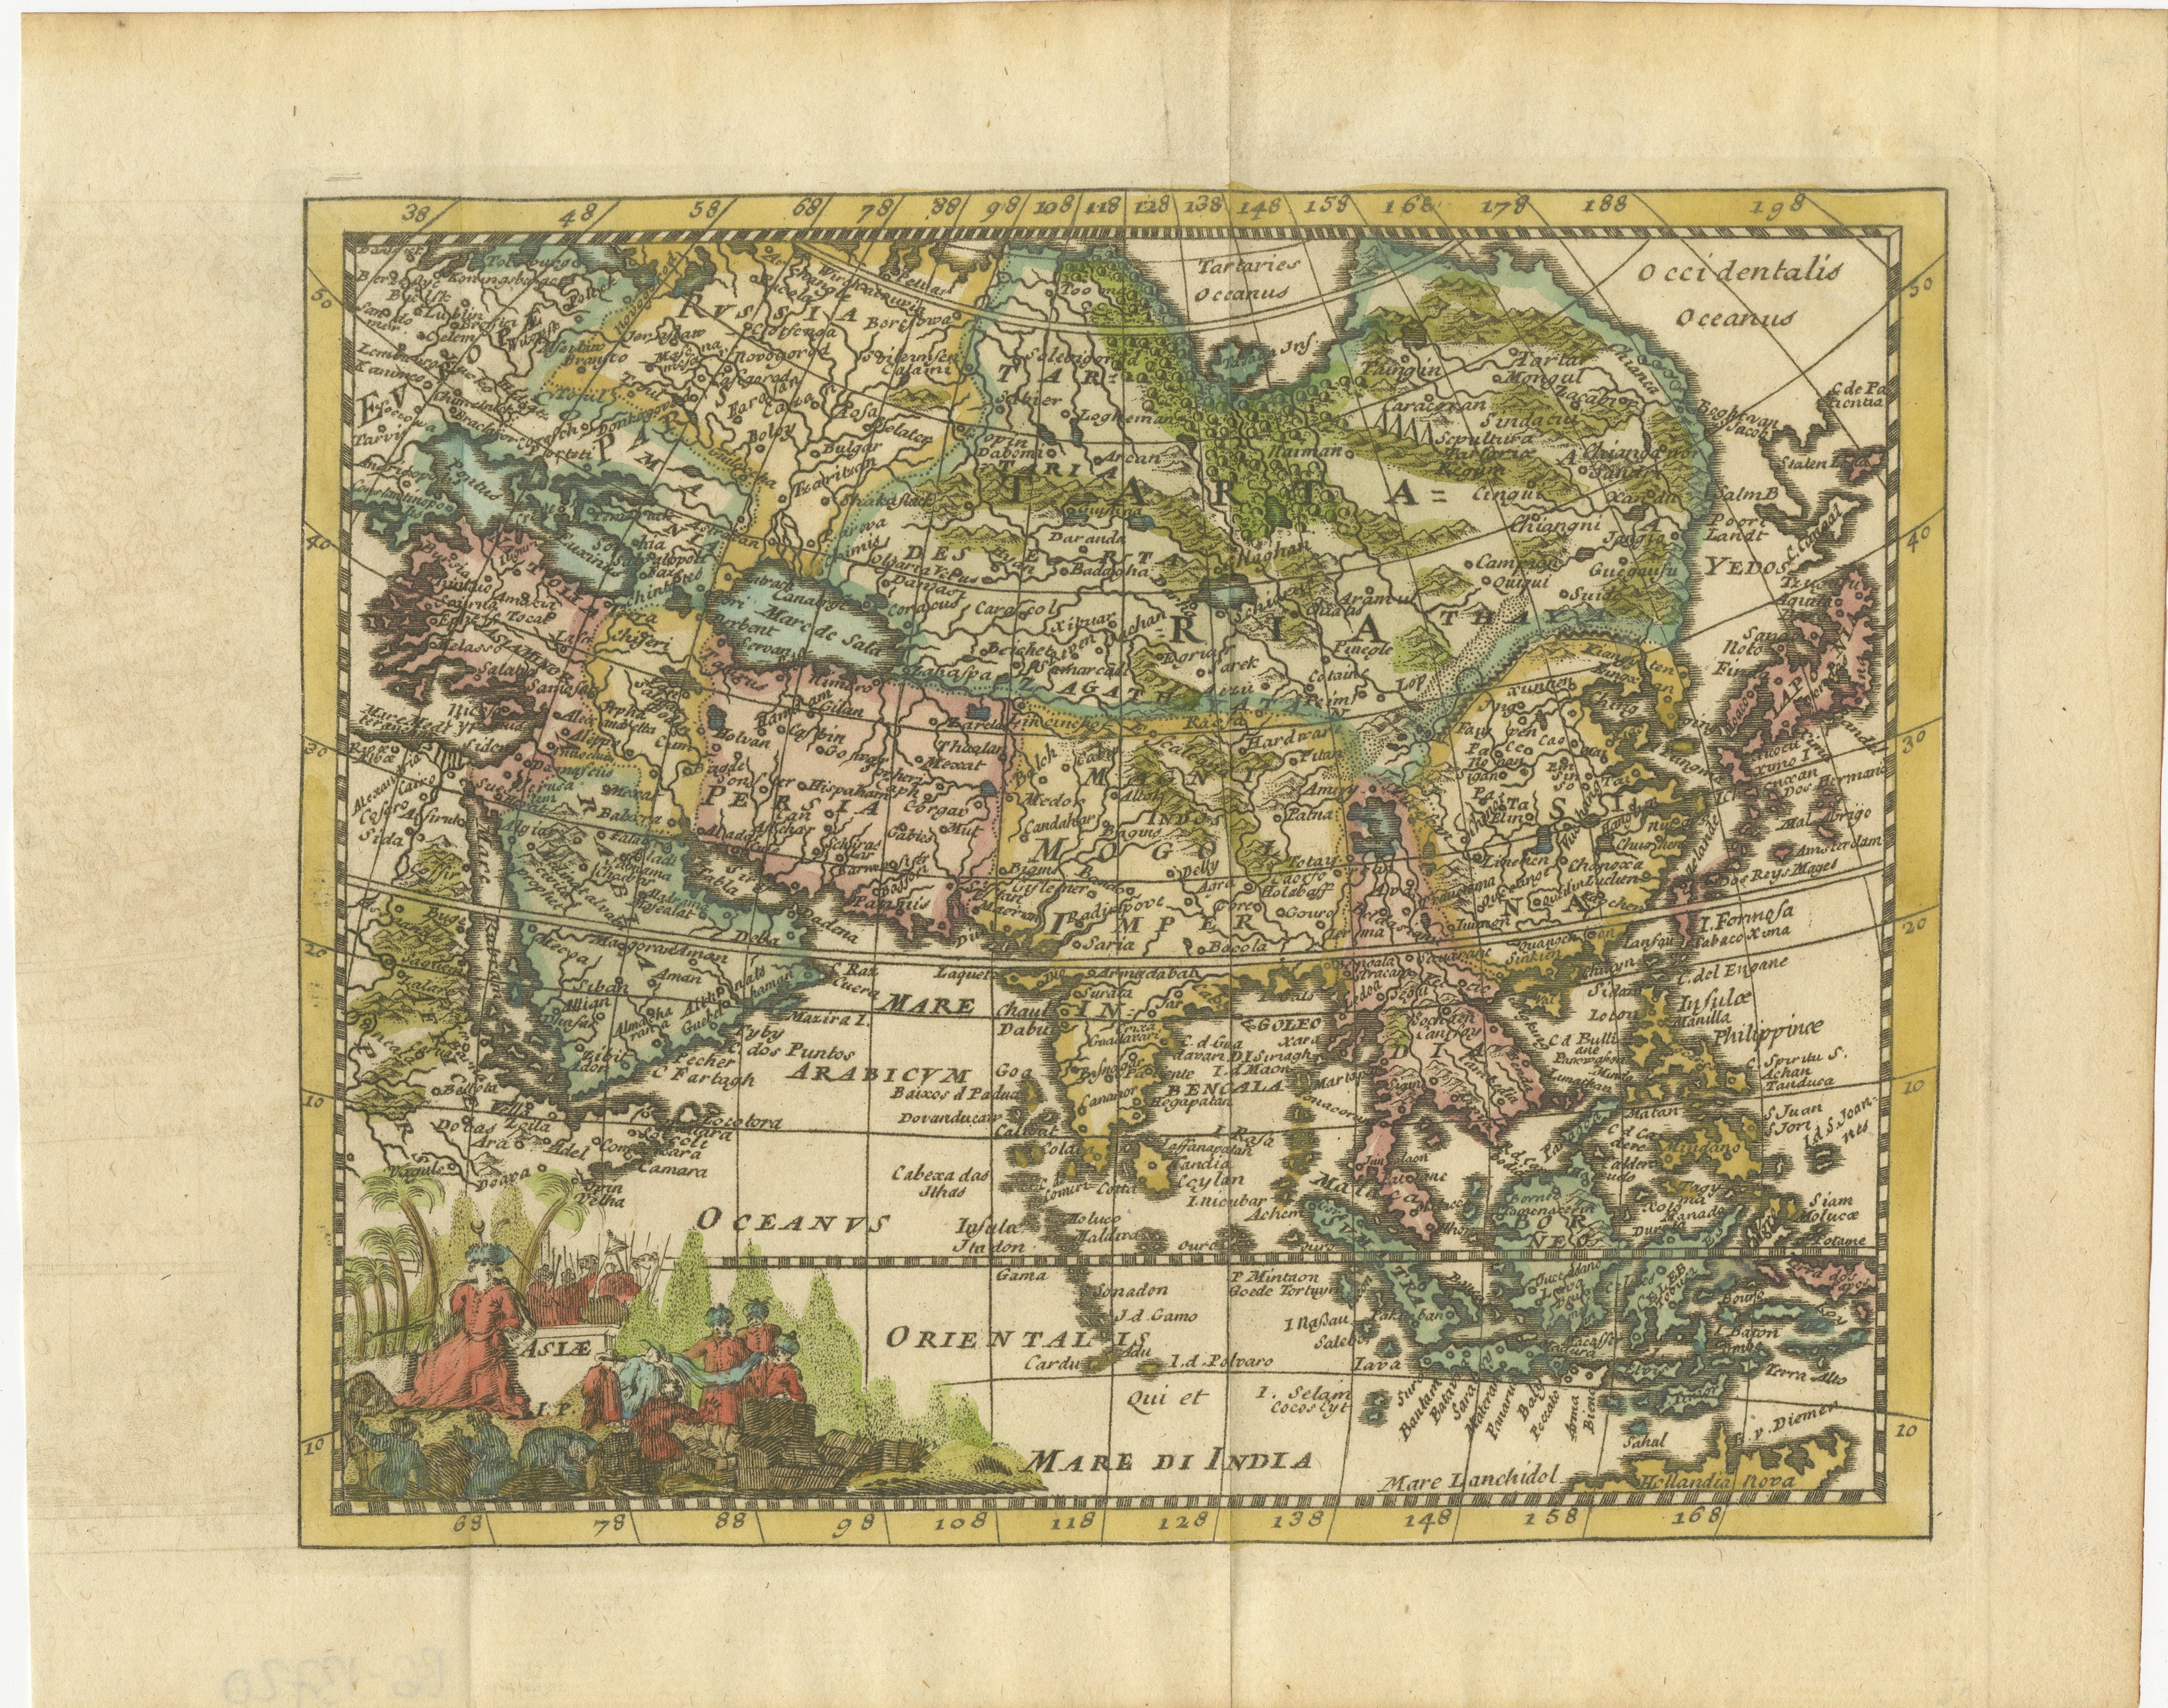 This original antique map is an artifact from a pivotal era in cartography, reflecting not only the geographical knowledge of its time but also the intertwining of art and science in map-making. 

The description indicates that it is an original